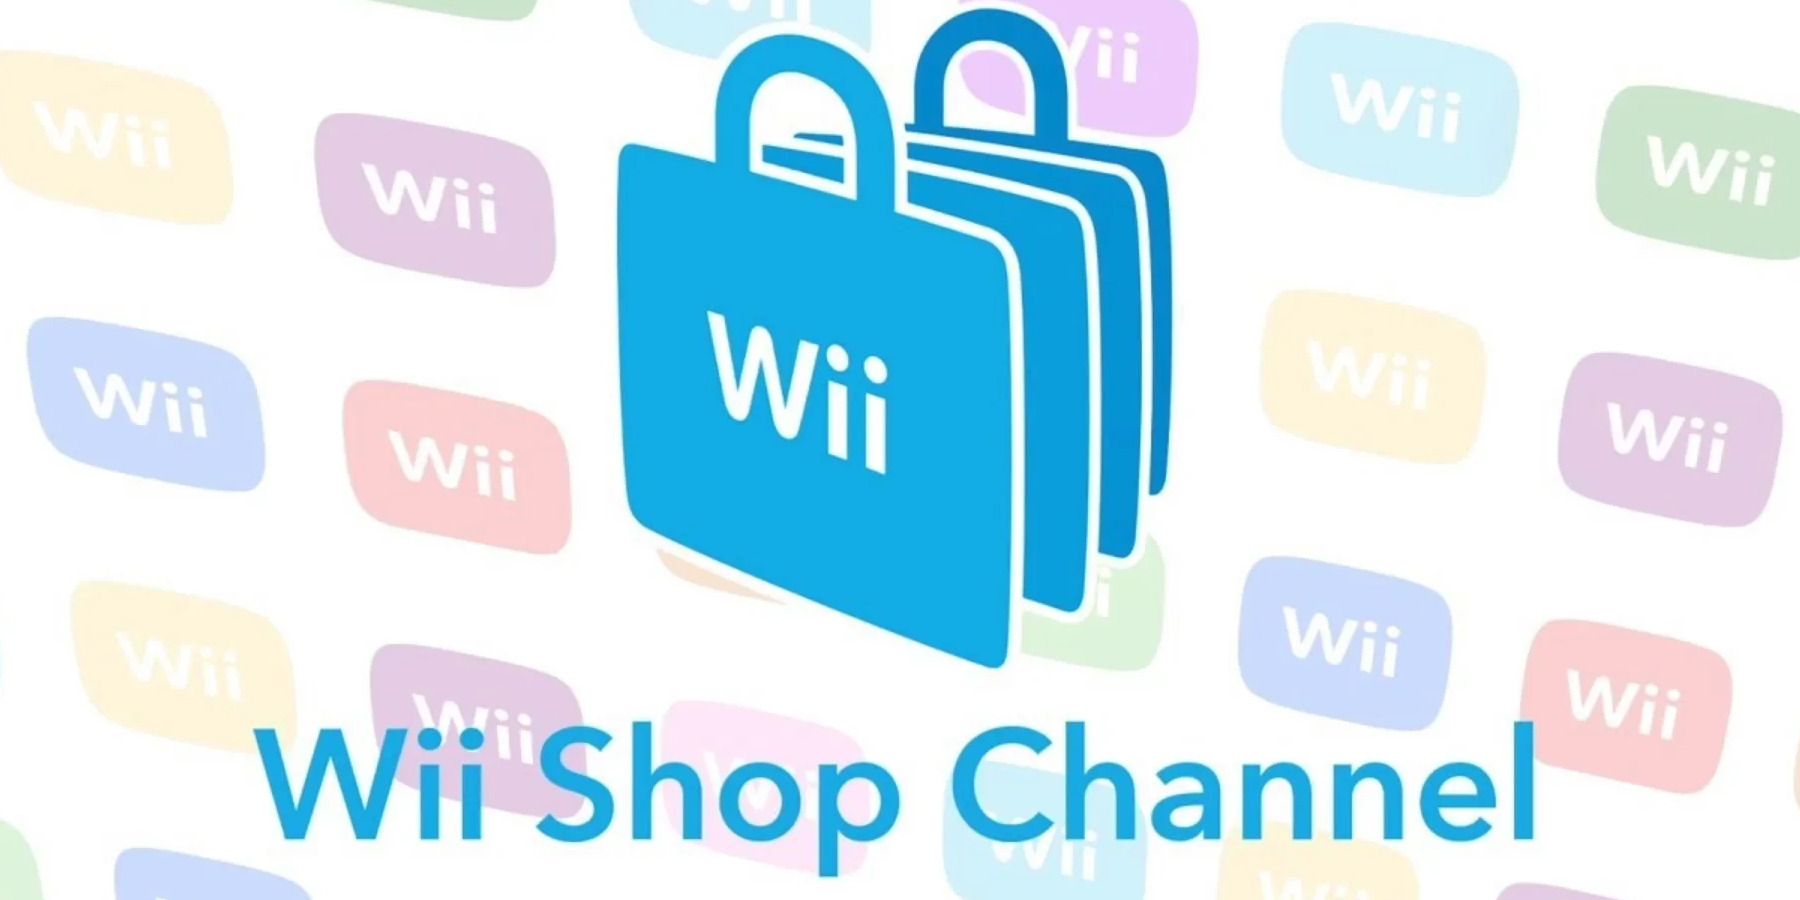 wii shop chennal and dsi back up (1)